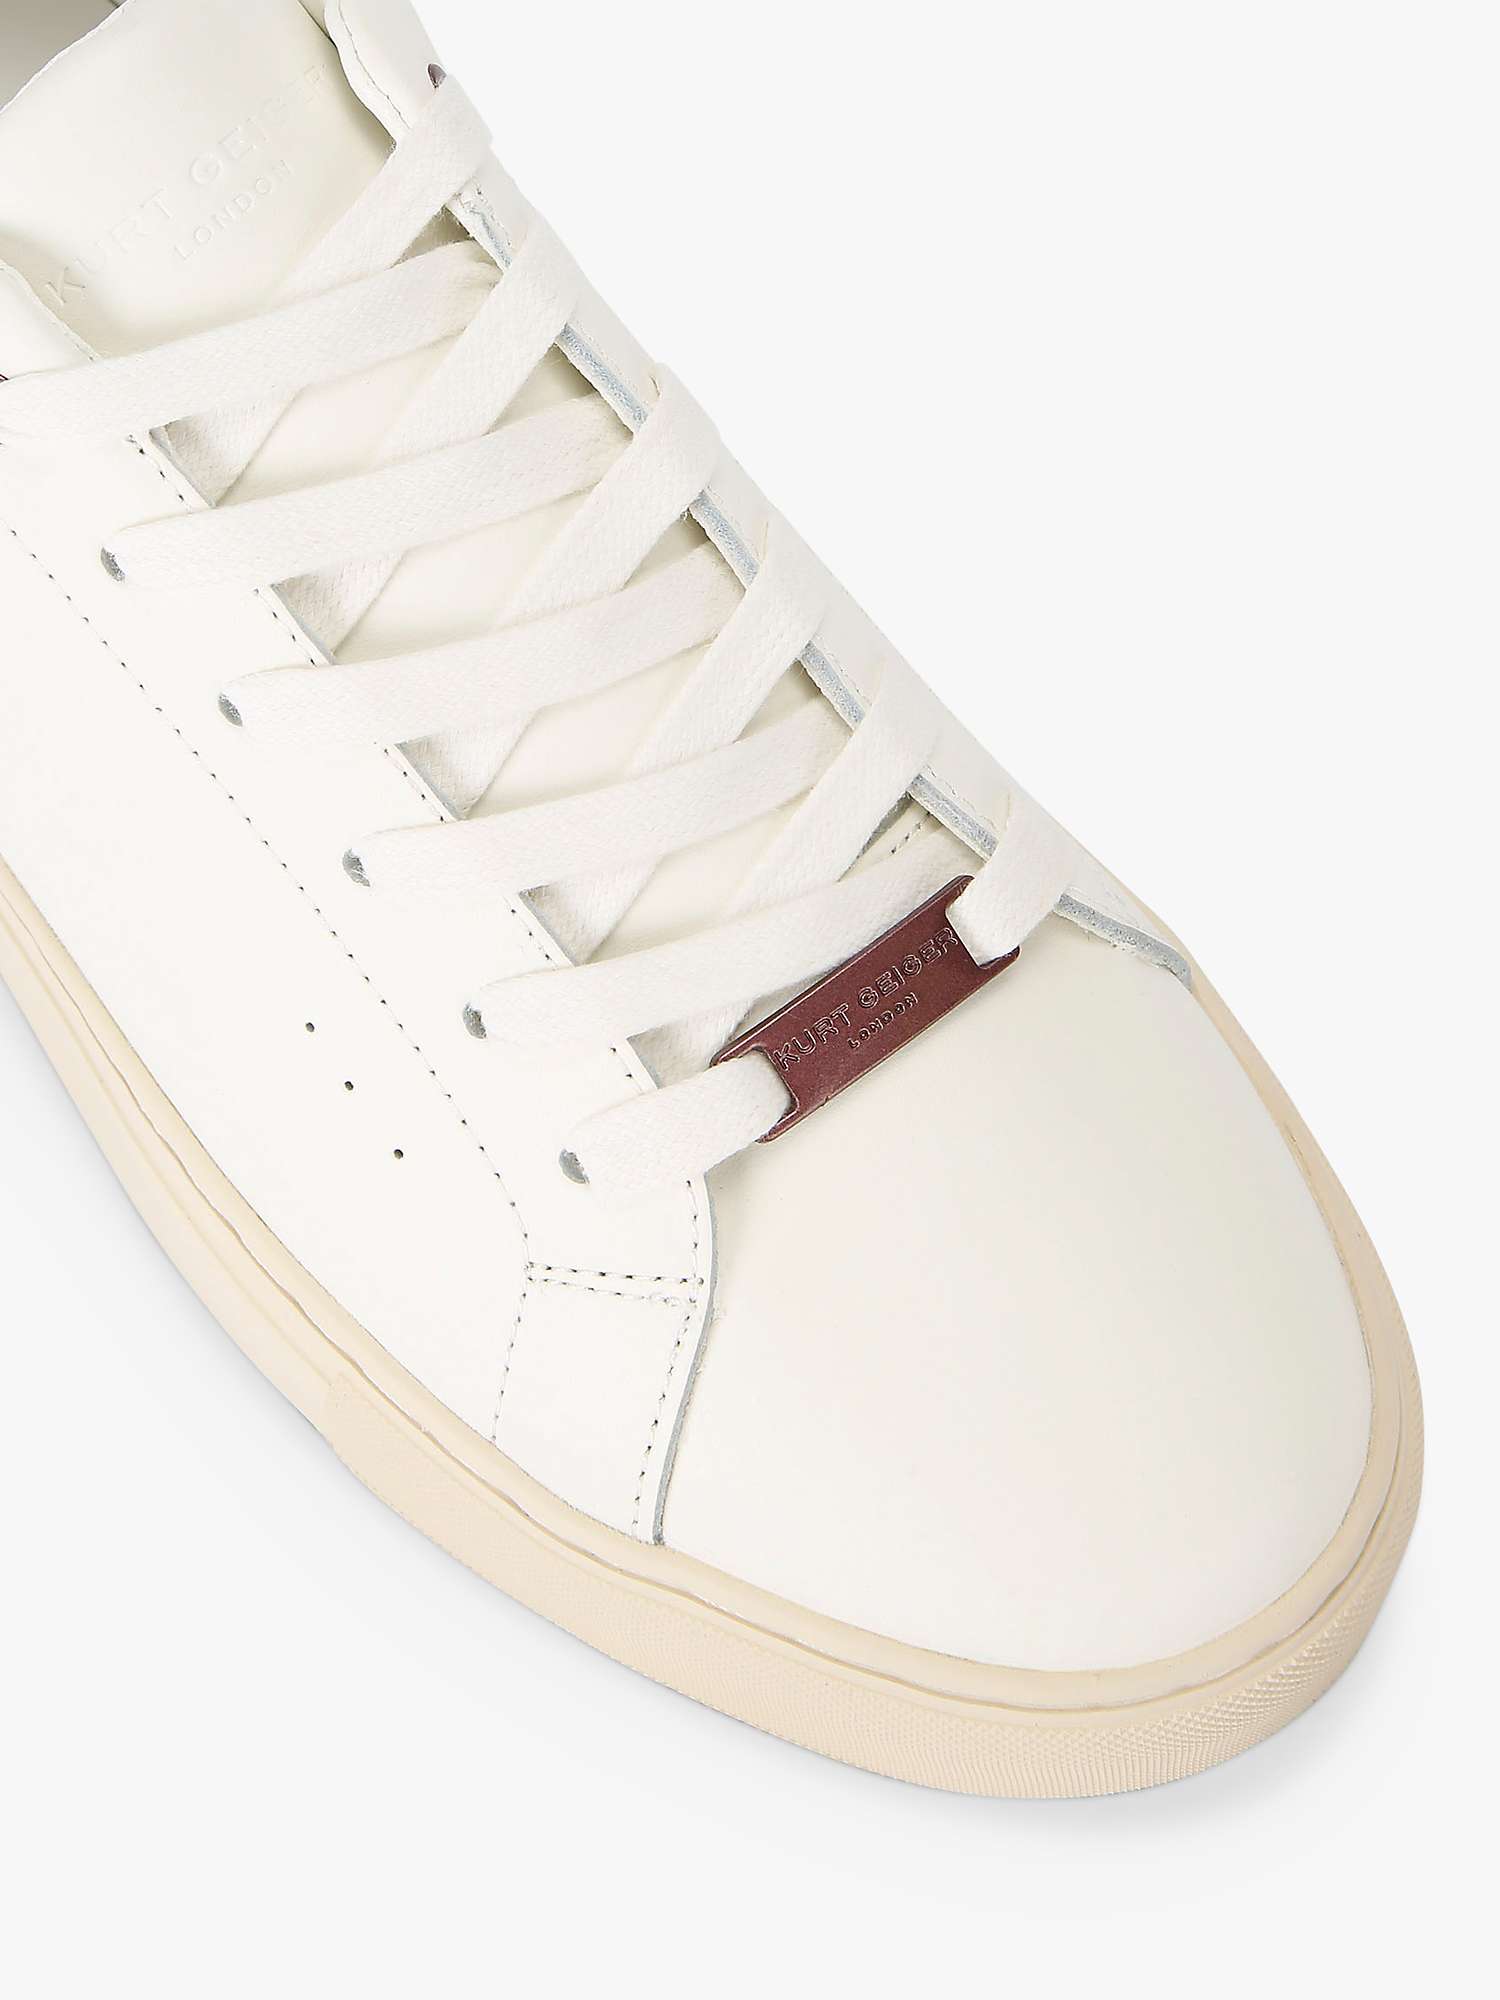 Buy Kurt Geiger London Laney3 Leather Trainers, White/Multi Online at johnlewis.com